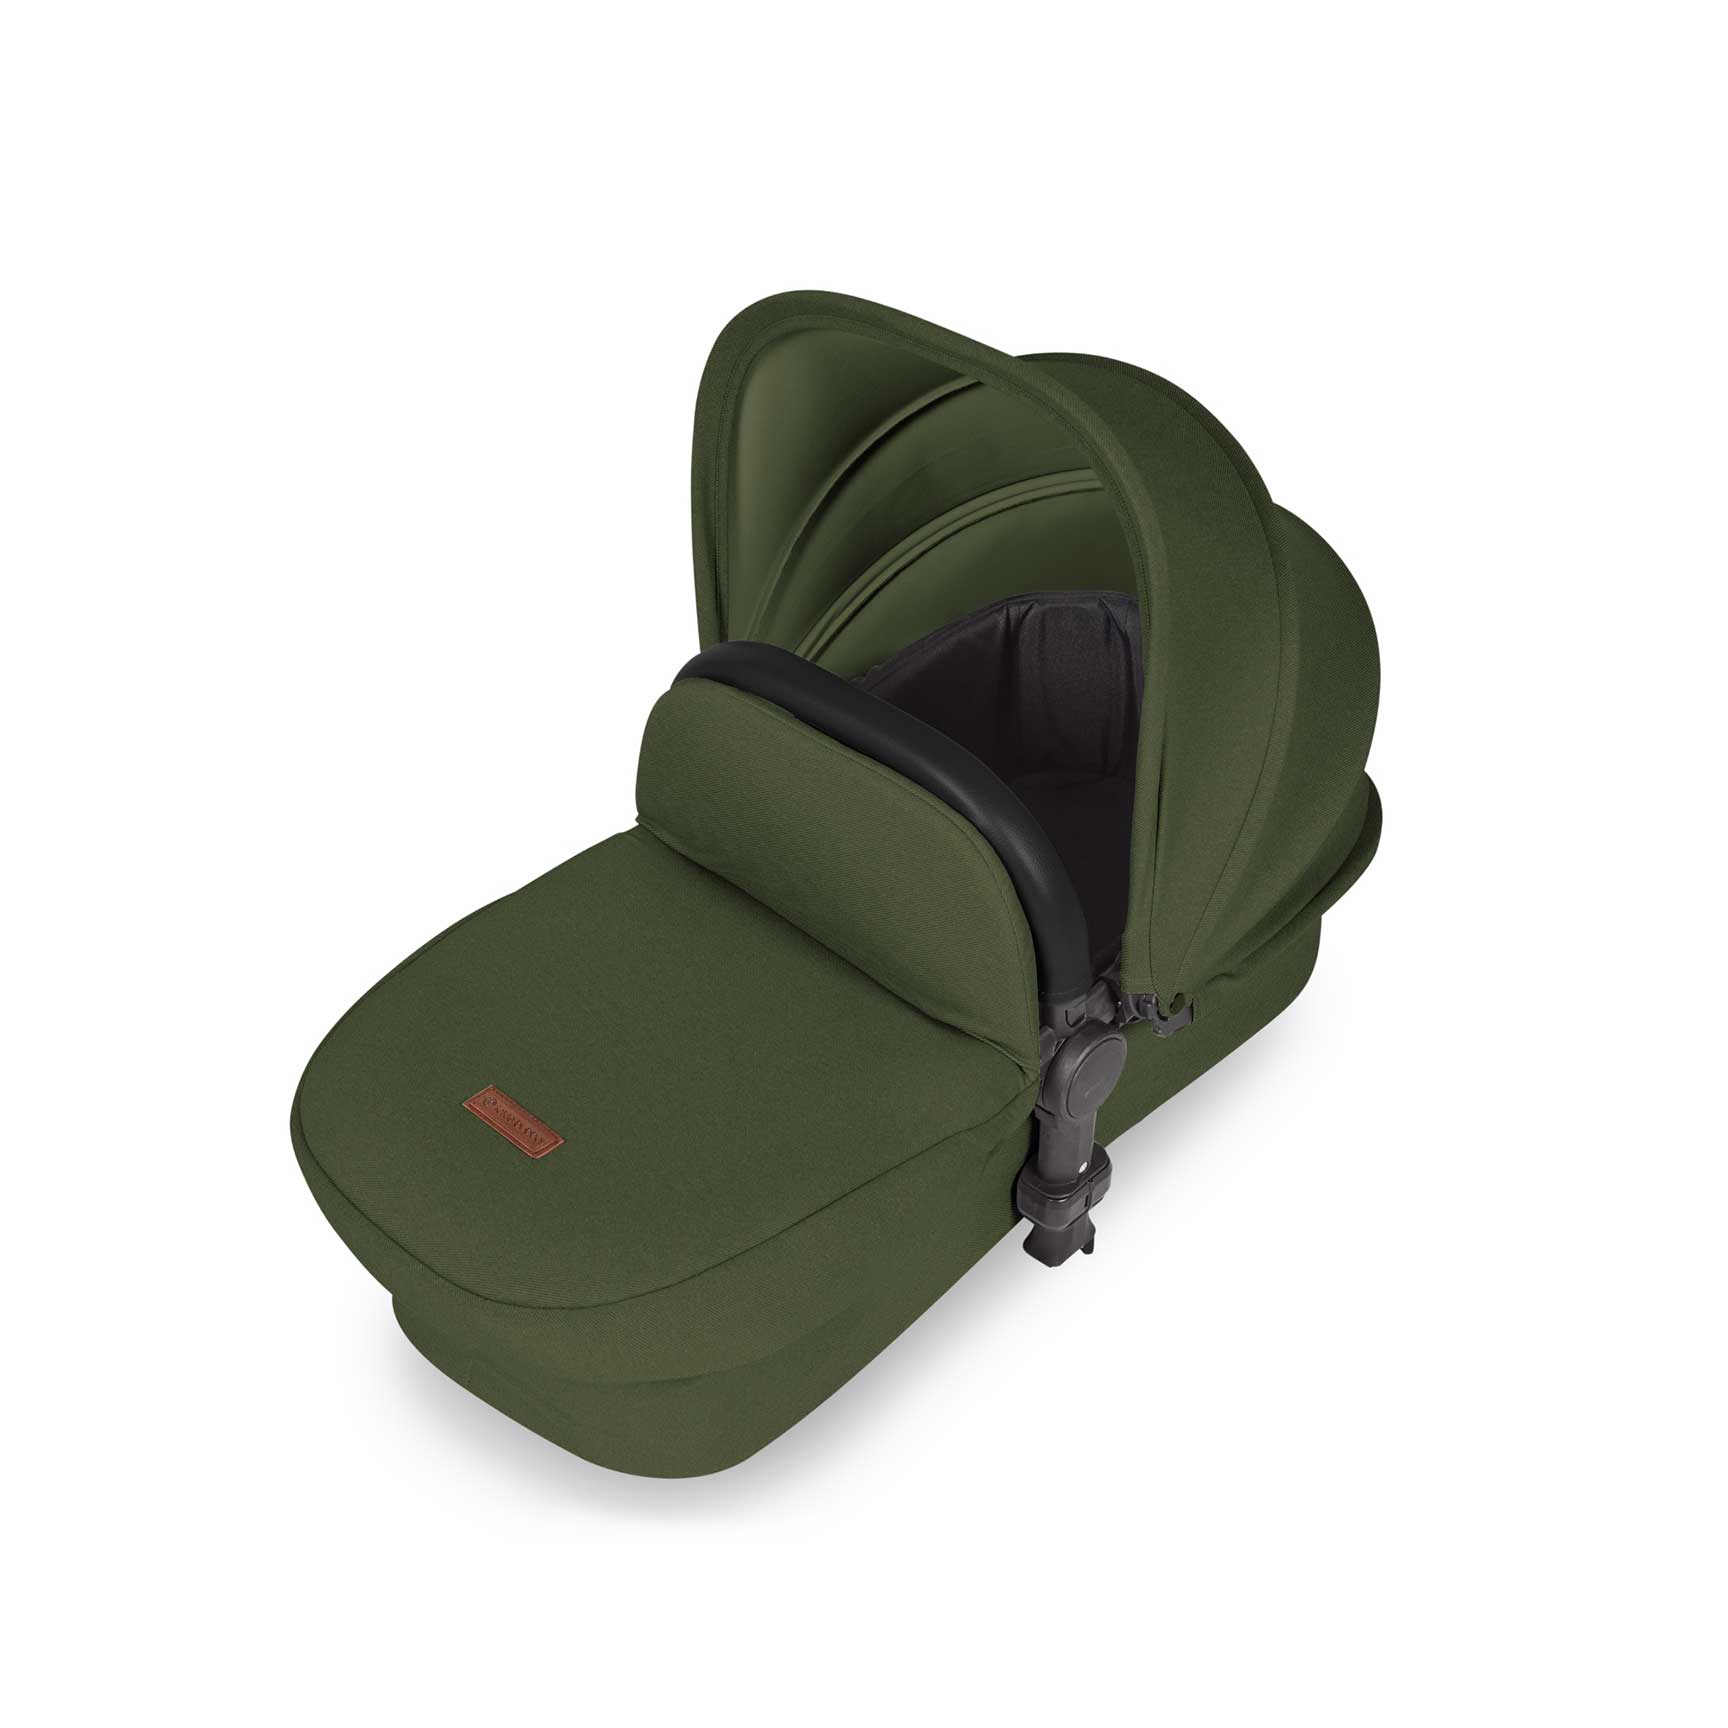 Ickle Bubba travel systems Ickle Bubba Stomp Luxe All-in-One Travel System with Isofix Base - Black/Woodland/Black 10-011-300-138